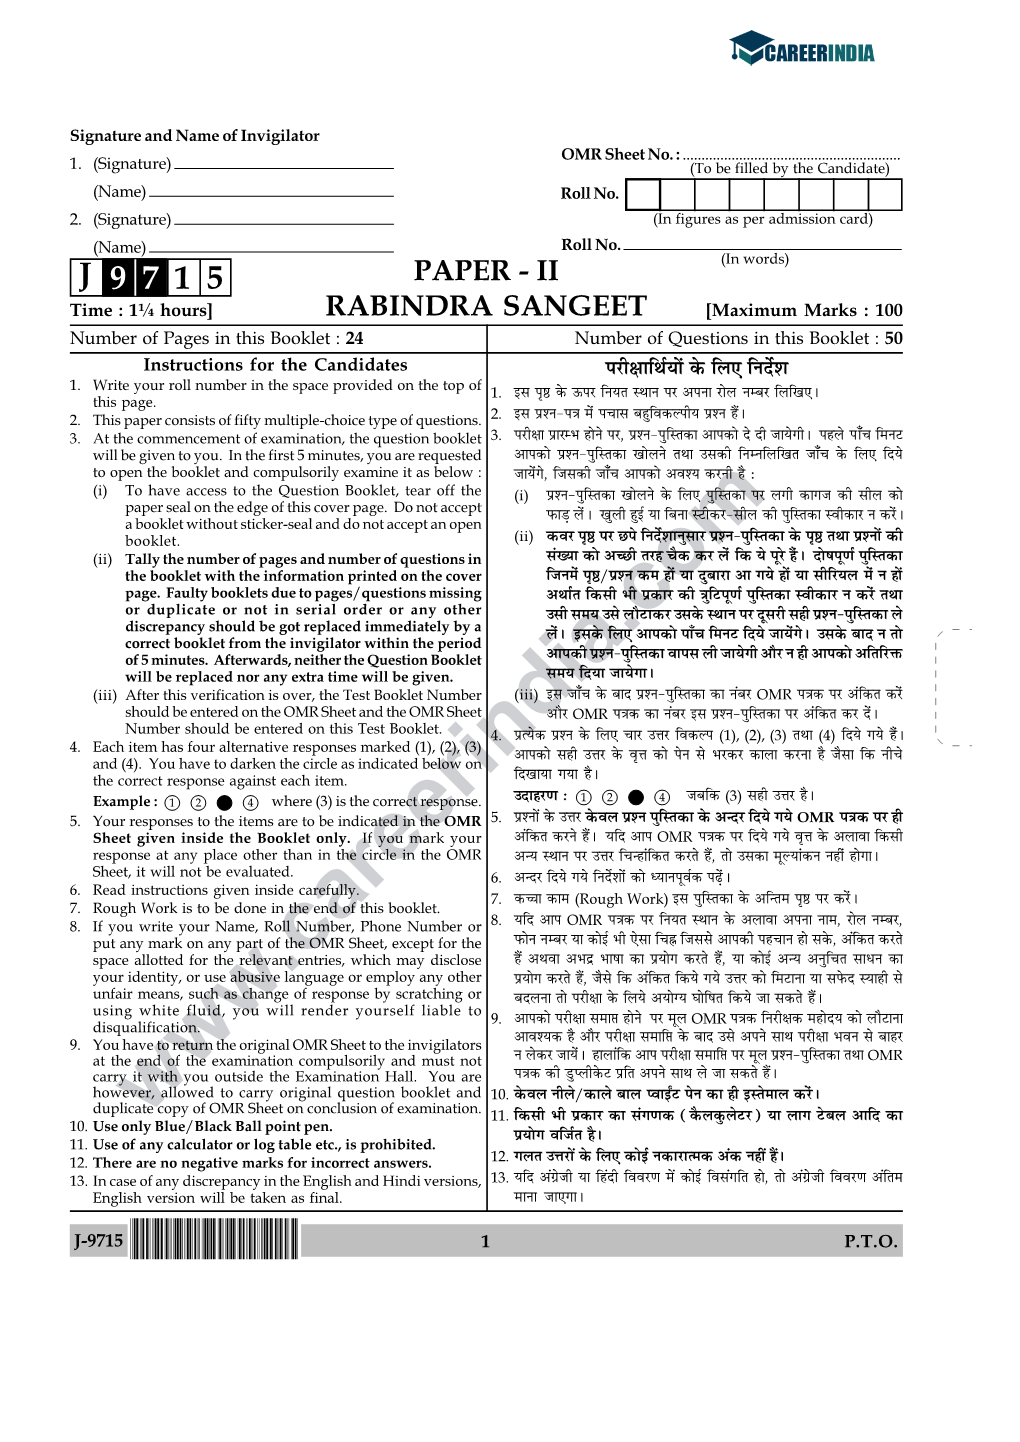 Copy of OMR Sheet on Conclusion of Examination